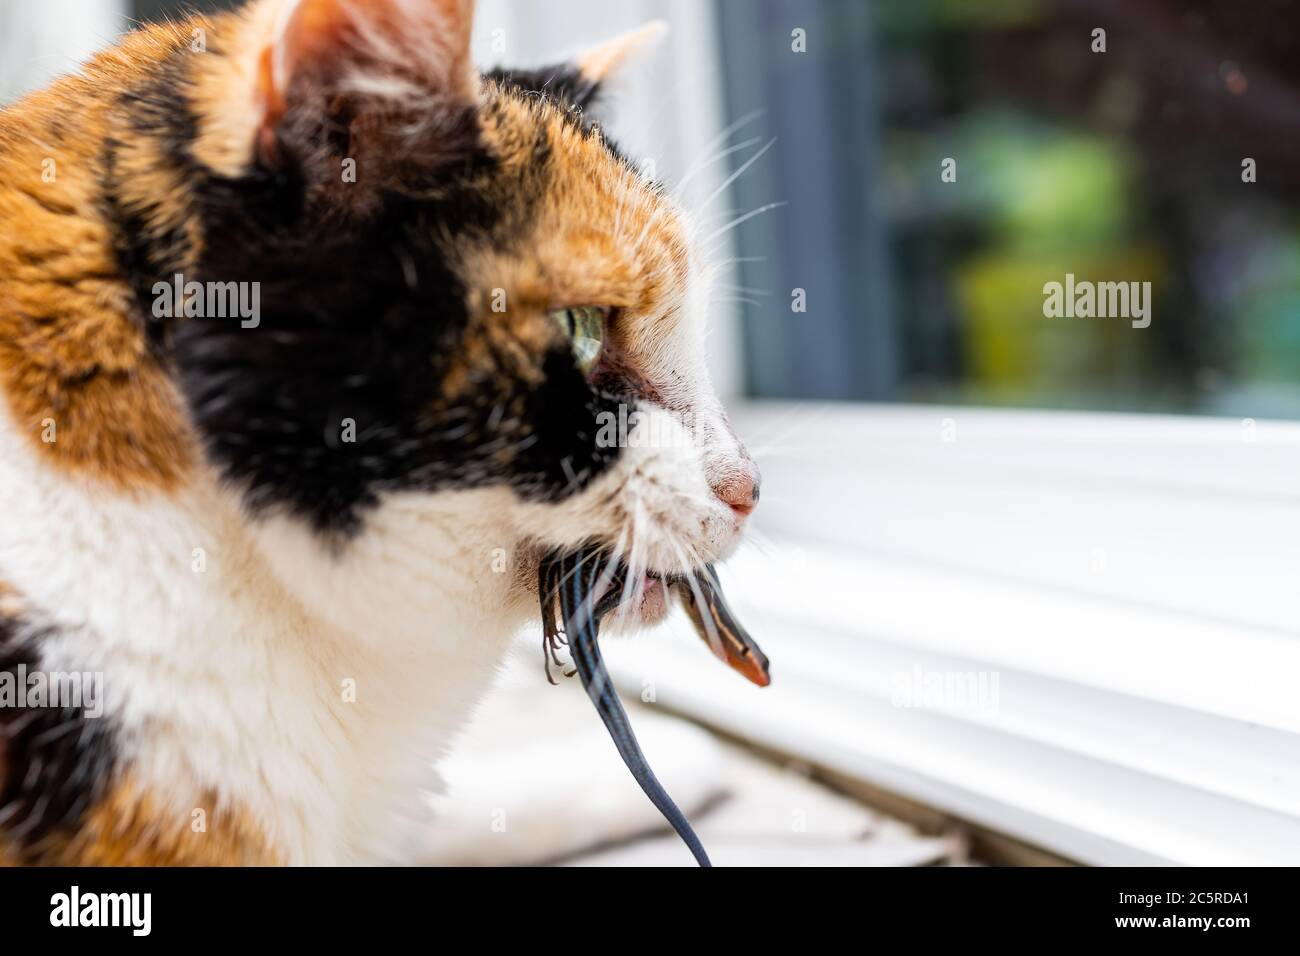 Calico cat outside outdoor hunter hunting catching blue lizard in mouth standing by door of home house asking to go inside Stock Photo